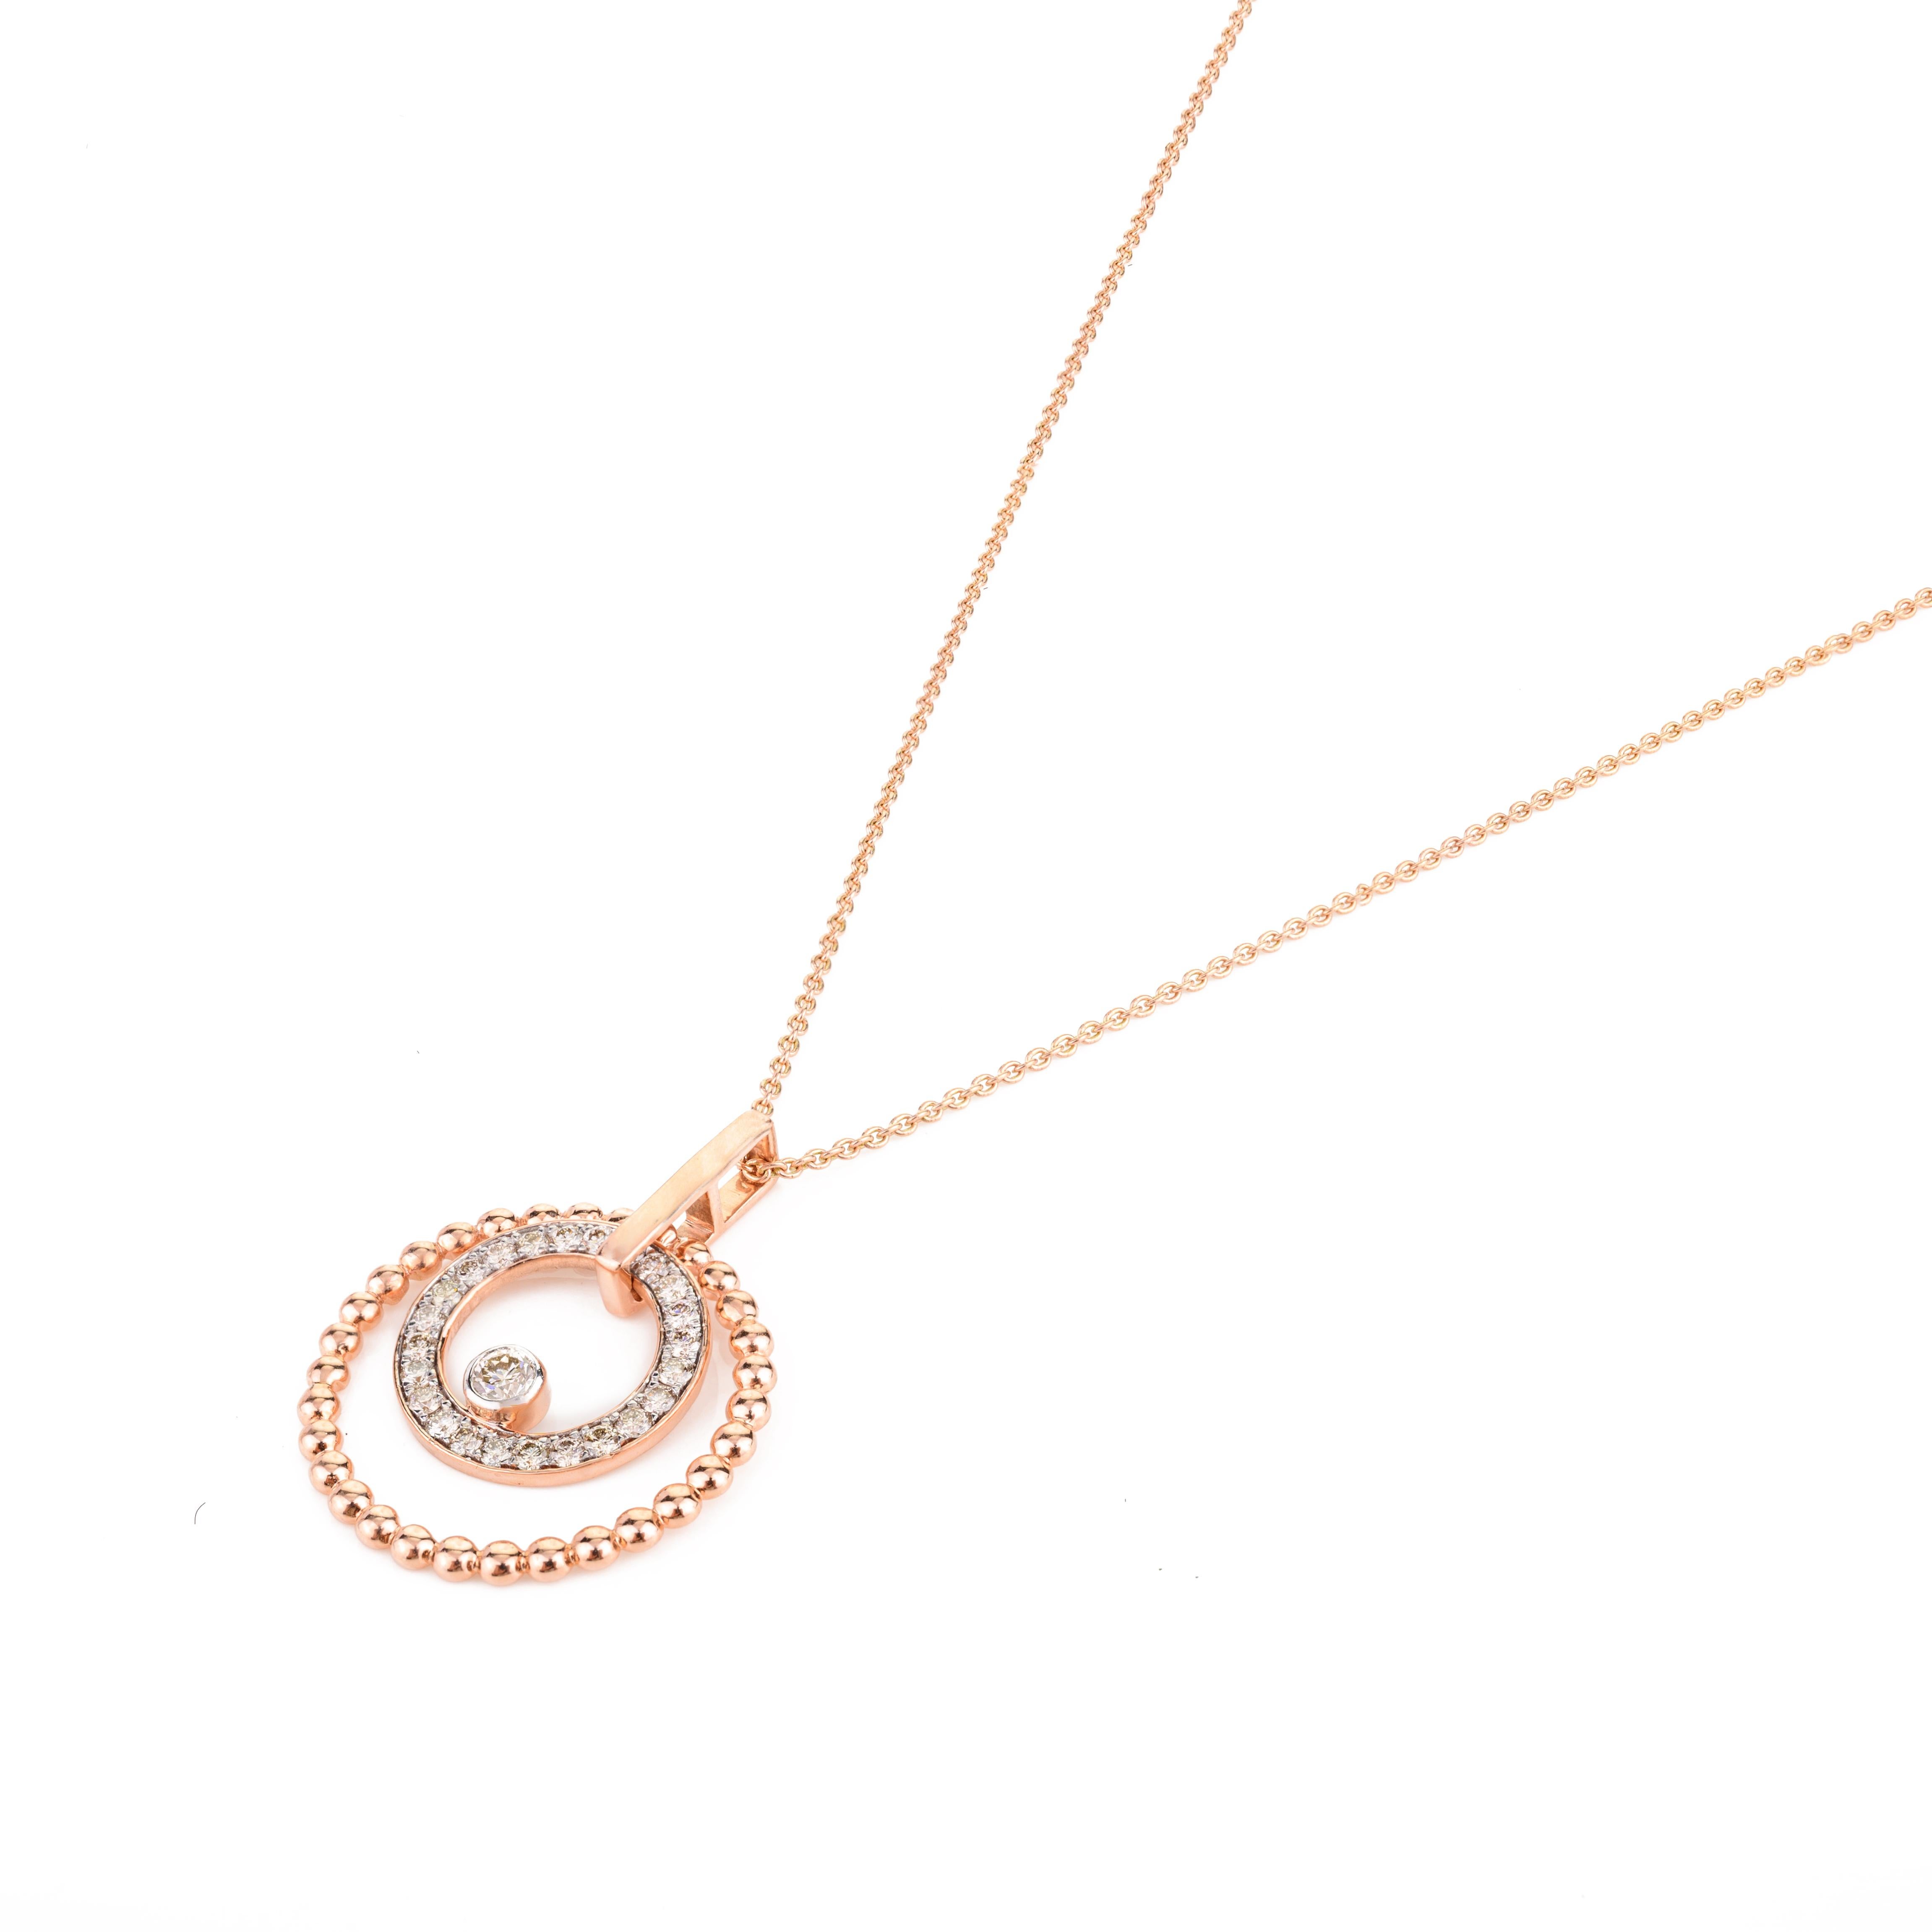 Modernist Two Circle Spiral Diamond Pendant Necklace 14k Solid Rose Gold Fine Jewelry For Sale